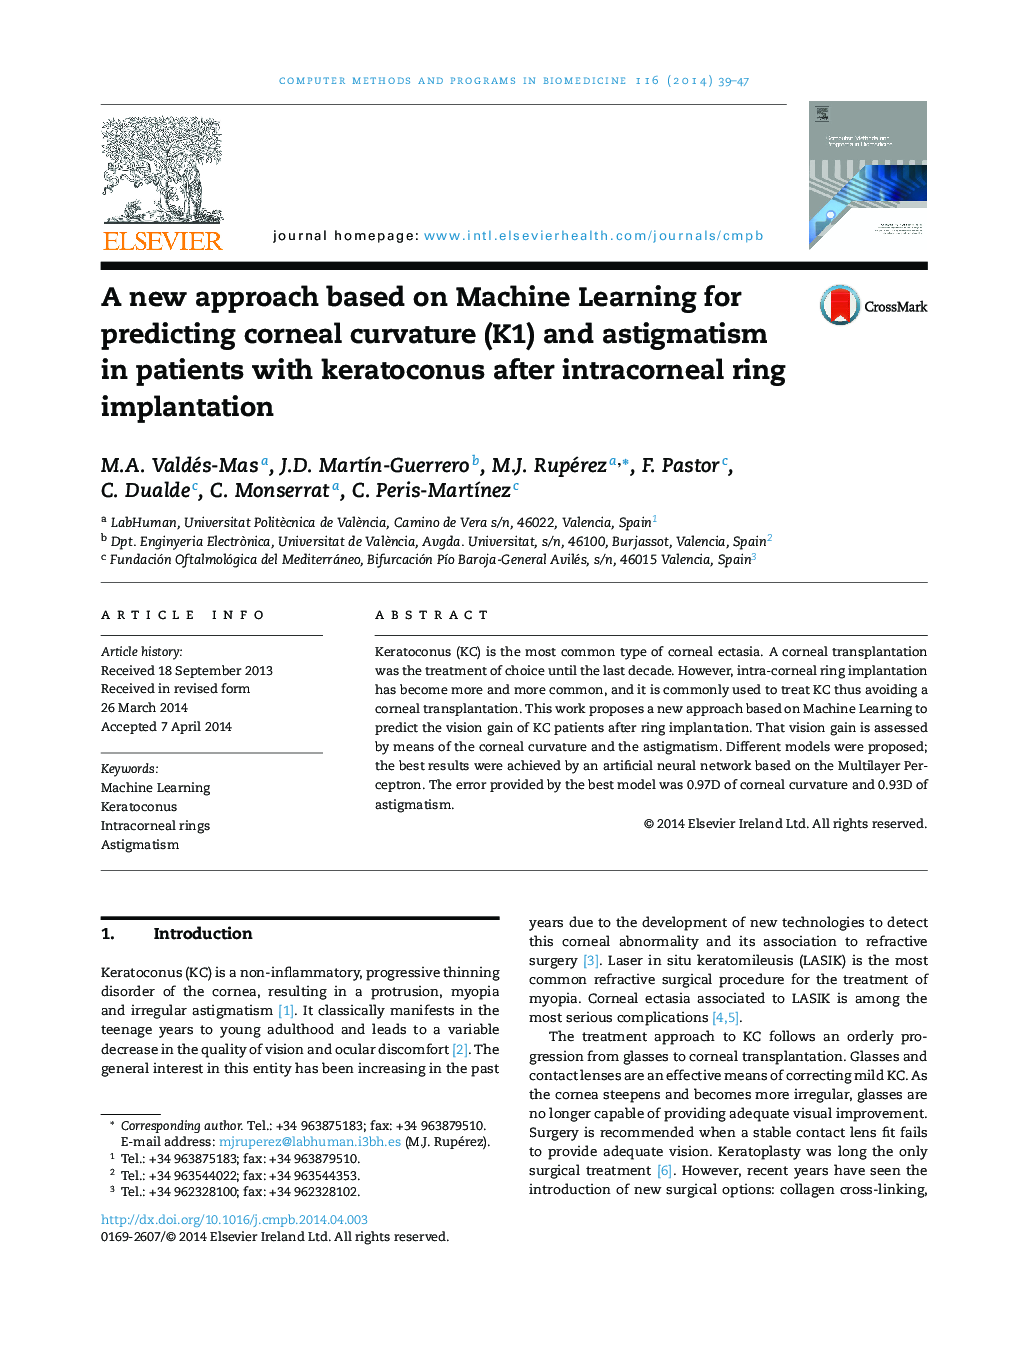 A new approach based on Machine Learning for predicting corneal curvature (K1) and astigmatism in patients with keratoconus after intracorneal ring implantation